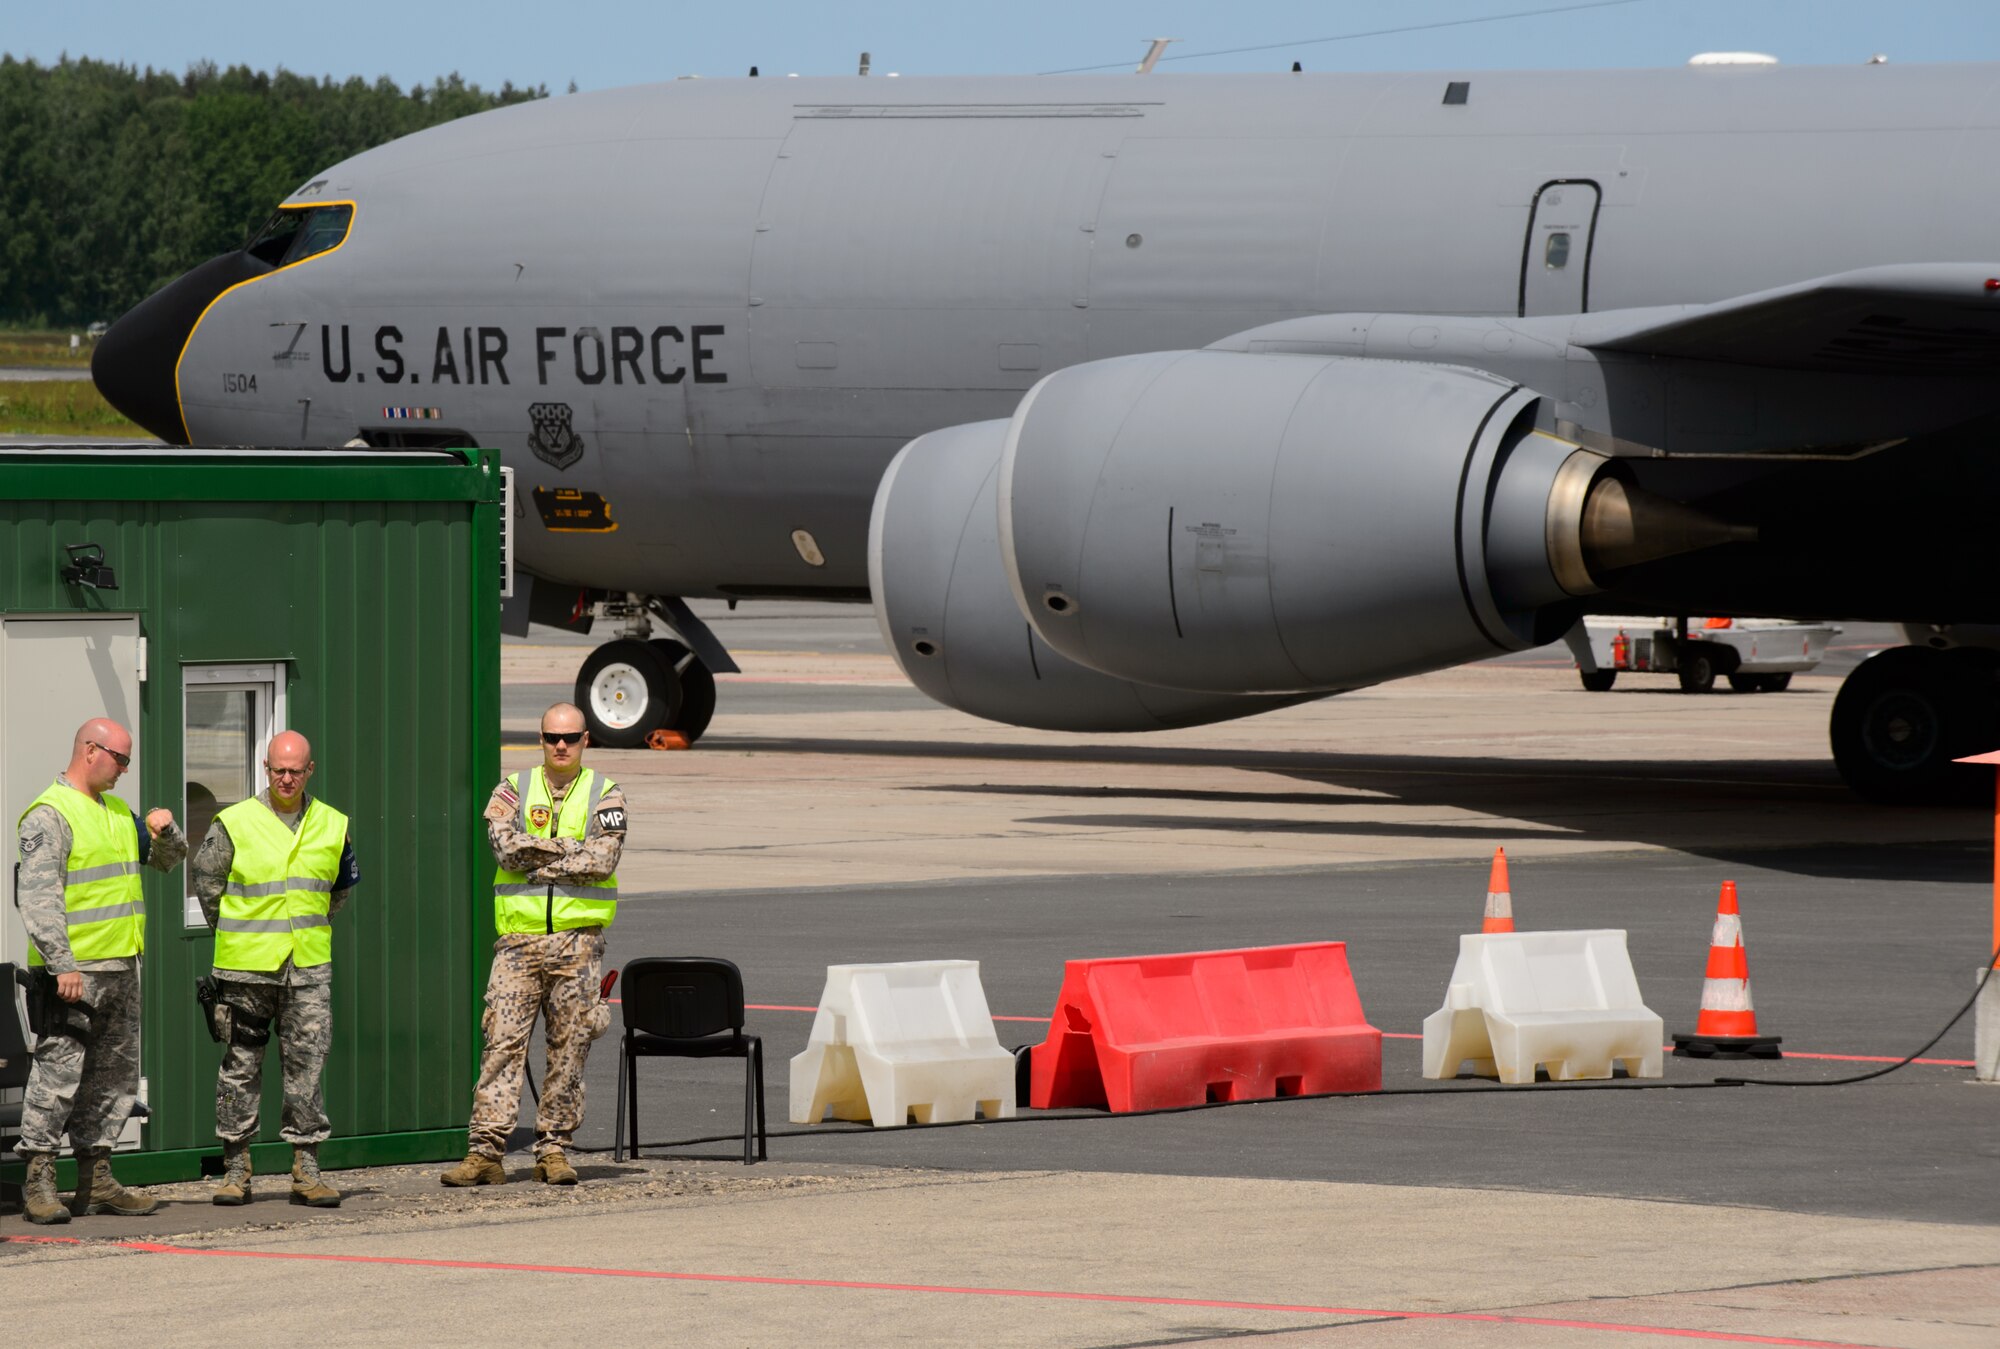 Michigan Air National Guard security forces member and Latvian Air Forces military police members guard two KC-135 Stratotankers on the Riga International Airport, Latvia, flightline prior to a sortie in support of Saber Strike 15 June 9, 2015. Guardsmen from Maryland, Michigan and Pennsylvania came together to support Saber Strike 15 by providing aerial-refueling and close air support. Saber Strike 15 is a joint and multinational exercise designed to promote stability in the Baltic area and provide an opportunity for military members to sharpen their skills. (U.S. Air Force photo/ Staff Sgt. Armando A. Schwier-Morales)